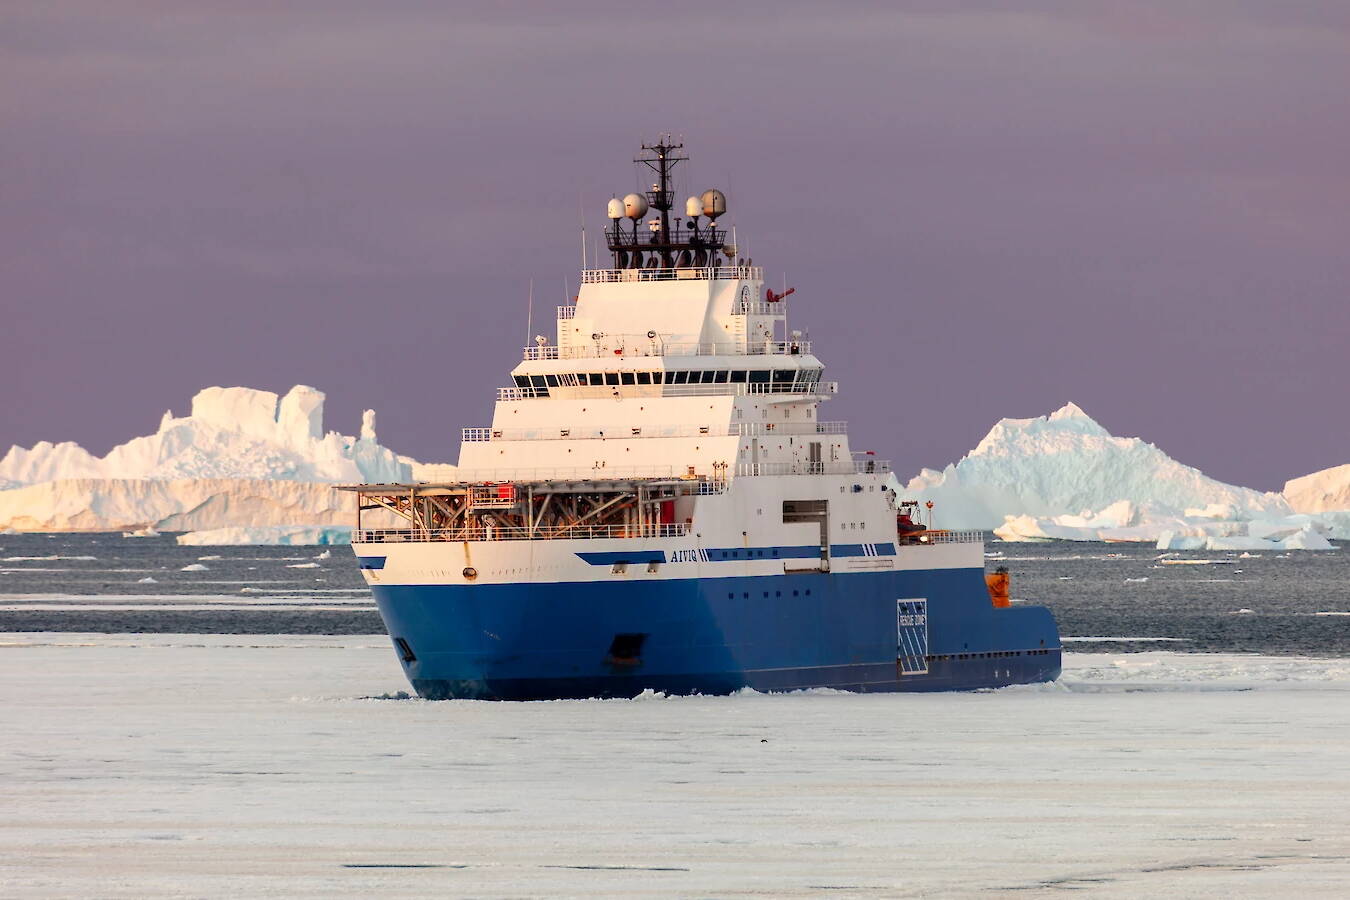 The Aiviq icebreaker, targeted by the U.S. Coast Guard for purchase and deployment in Alaska, completes a chartered refueling operation at Davis Research Station in Antarctica. (Kirk Yatras / Australian Antarctic Program)